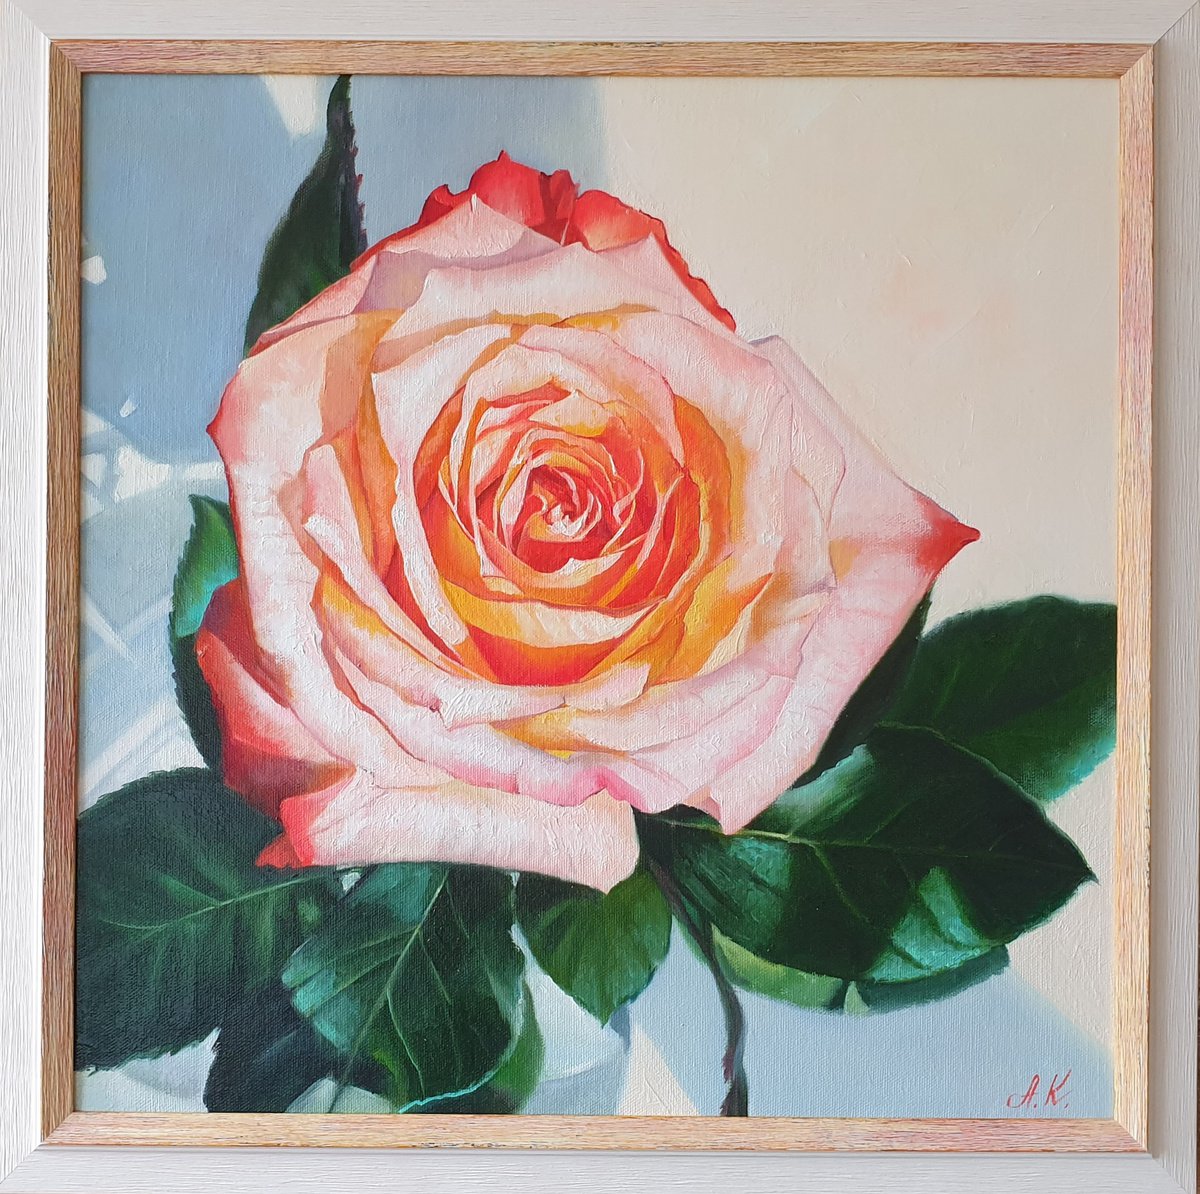 Rose from a loved one. rose red flower liGHt original painting GIFT (2021) by Anna Kotelnik